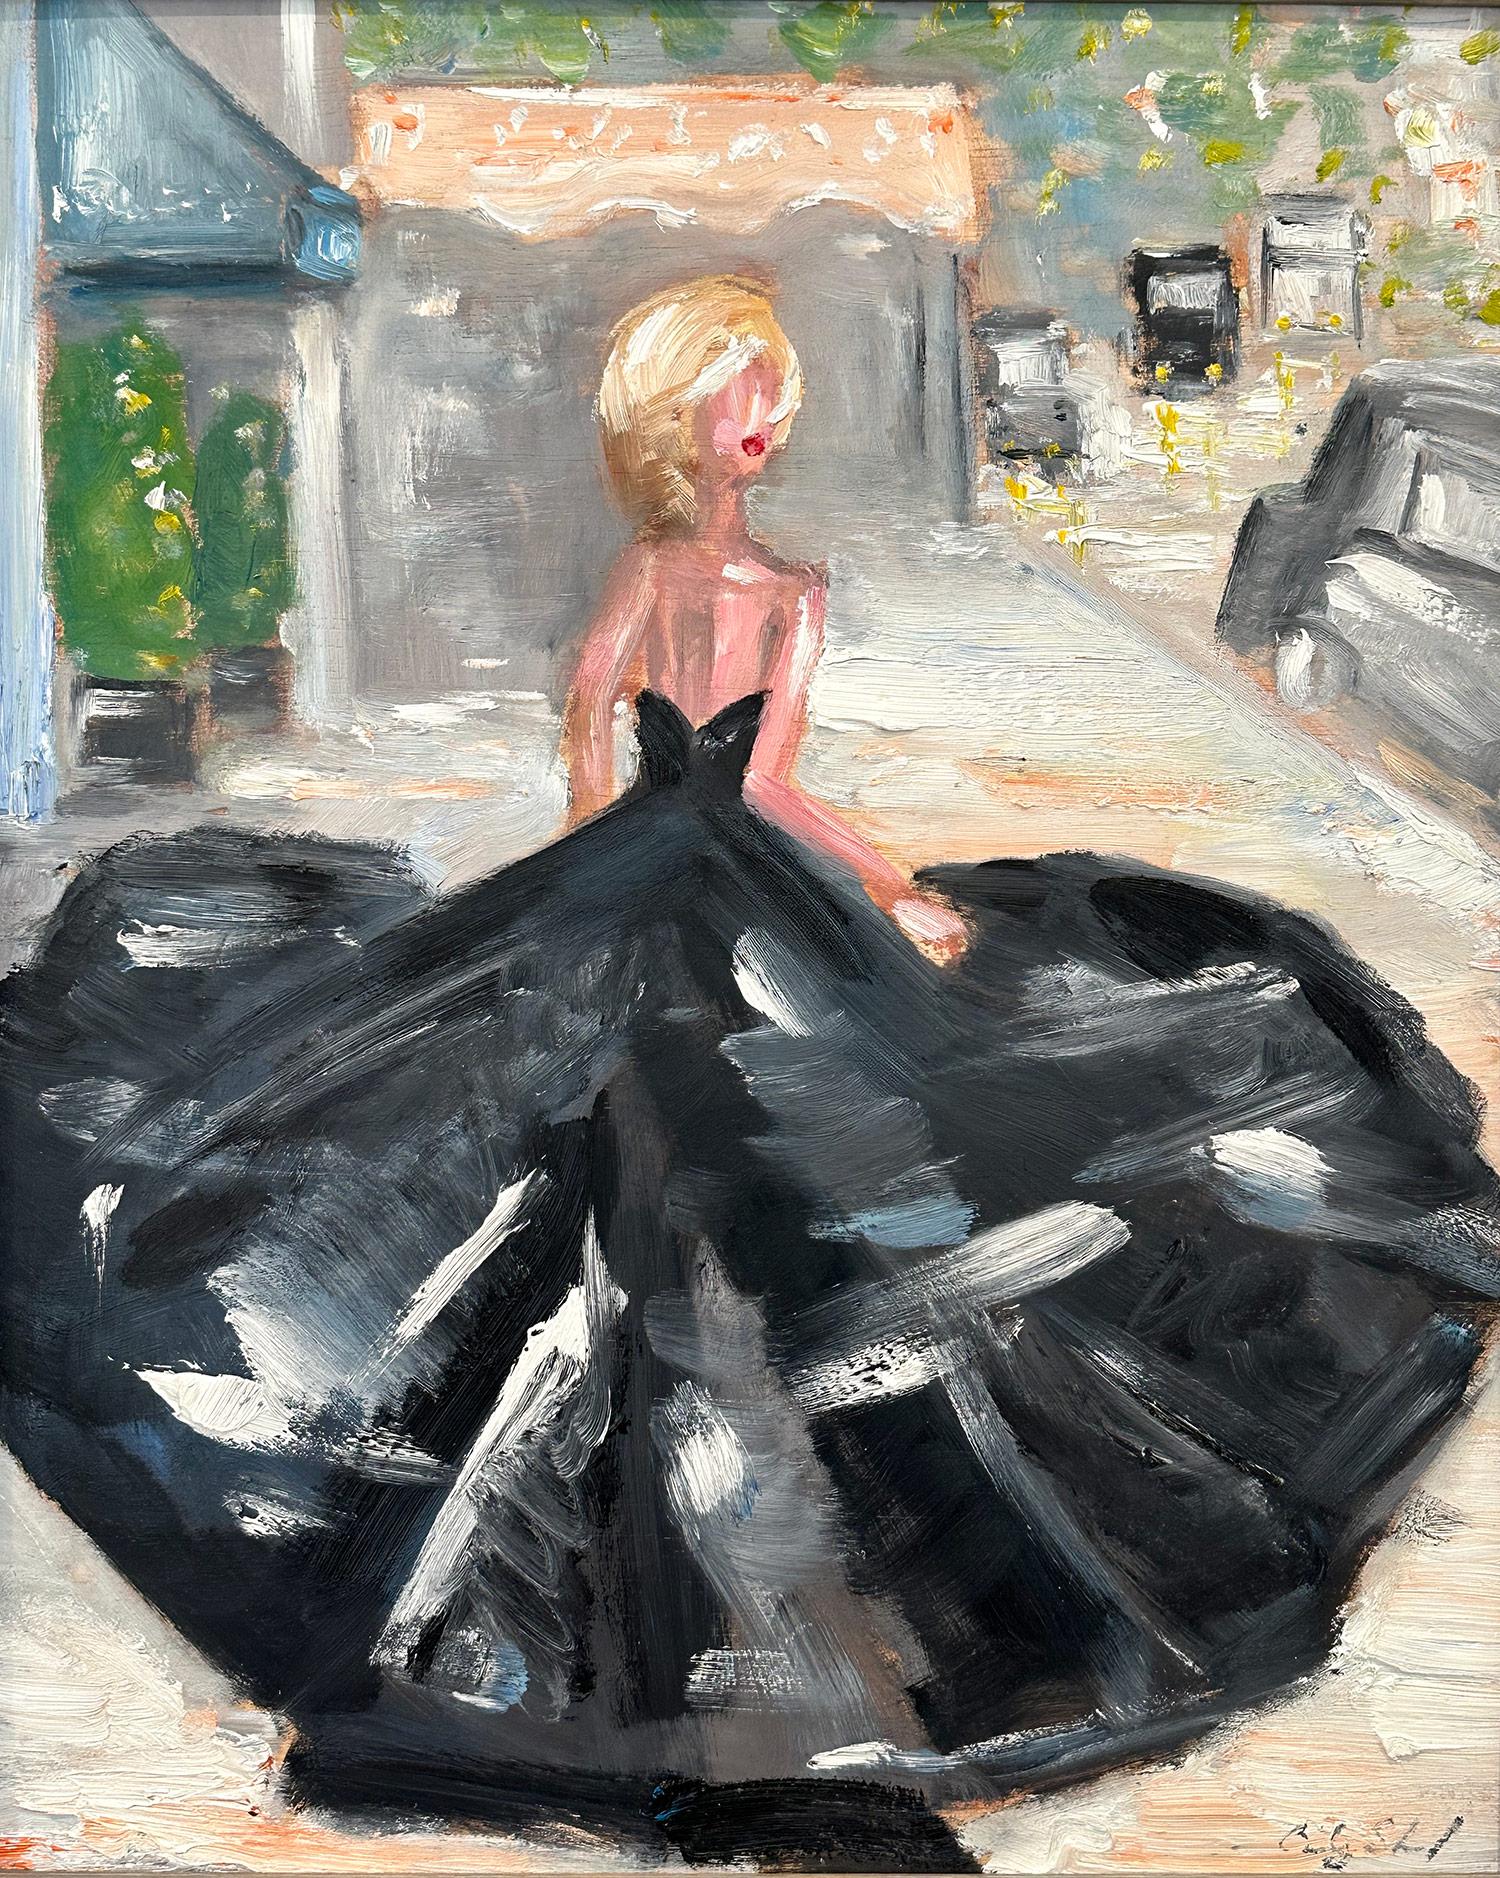 Exploring the purity of the feminine form and the excitement of High-End Fashion, artist Cindy Shaoul creates a dialogue between the figurative and the abstract. Her spirited compositions are both dramatic and invigorating, capturing the fleeting